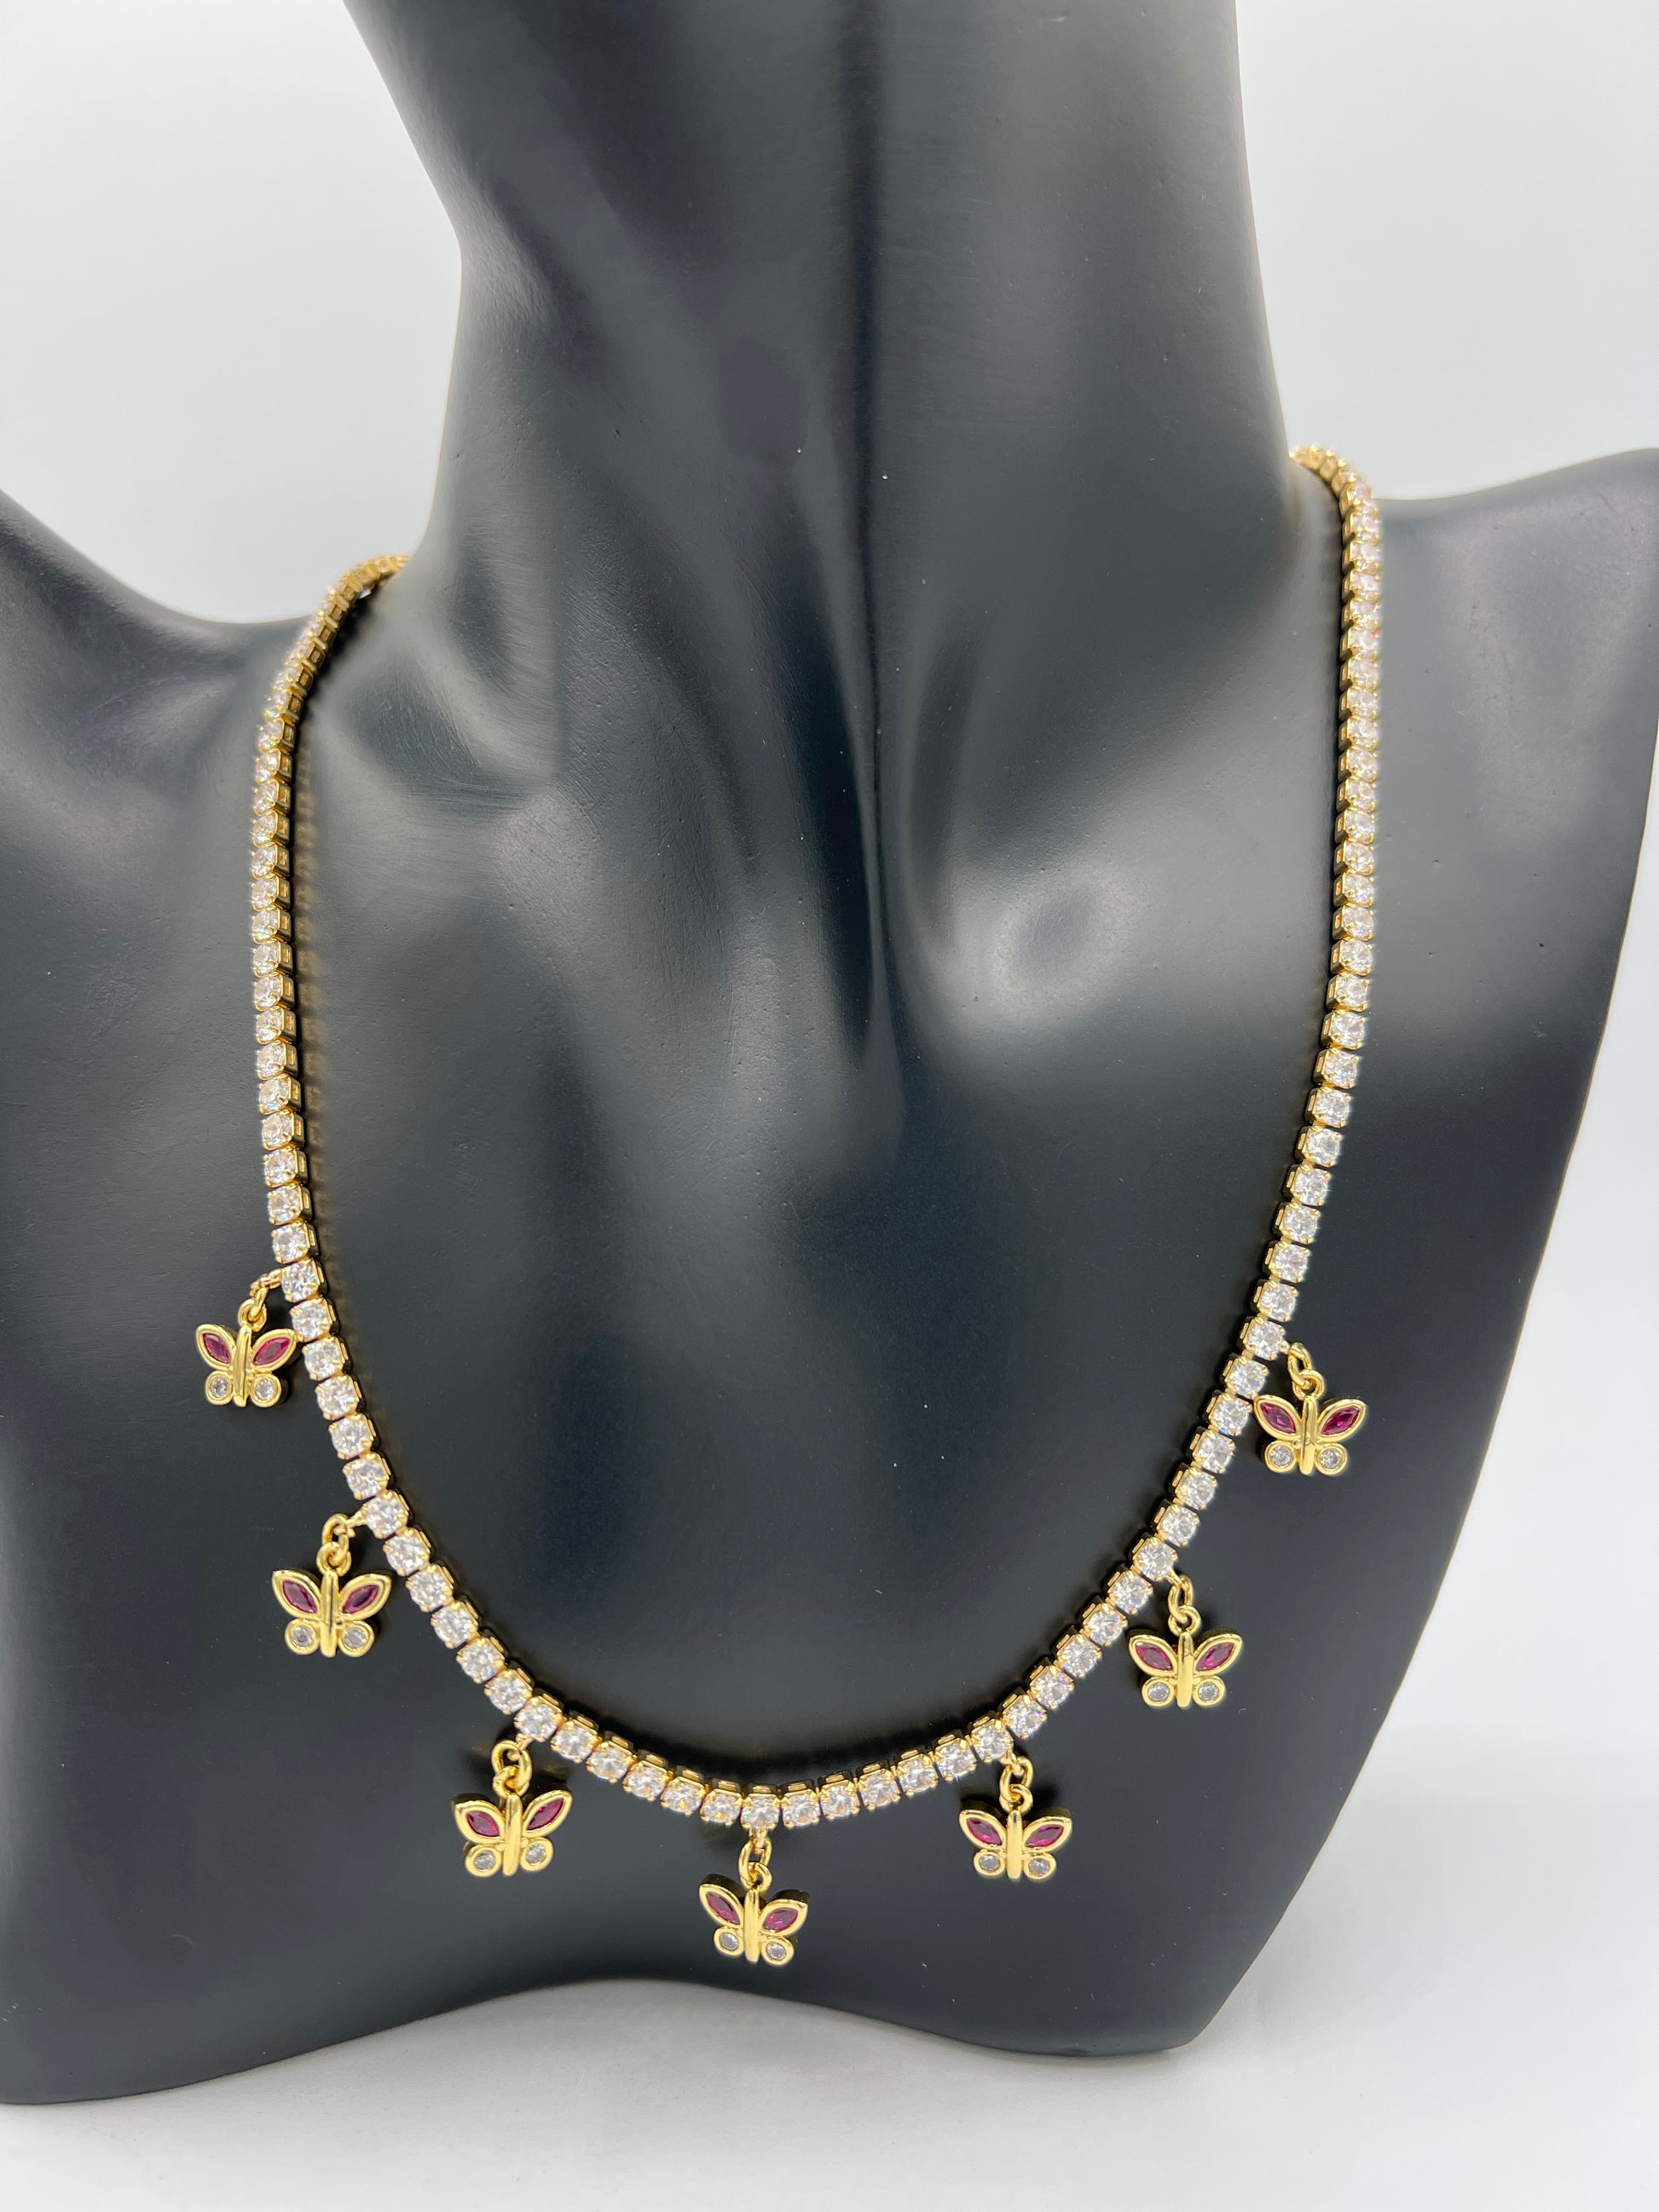 yellow gold plated tennis necklace with butterfly charms hanging the butterfly wings are ruby red and white